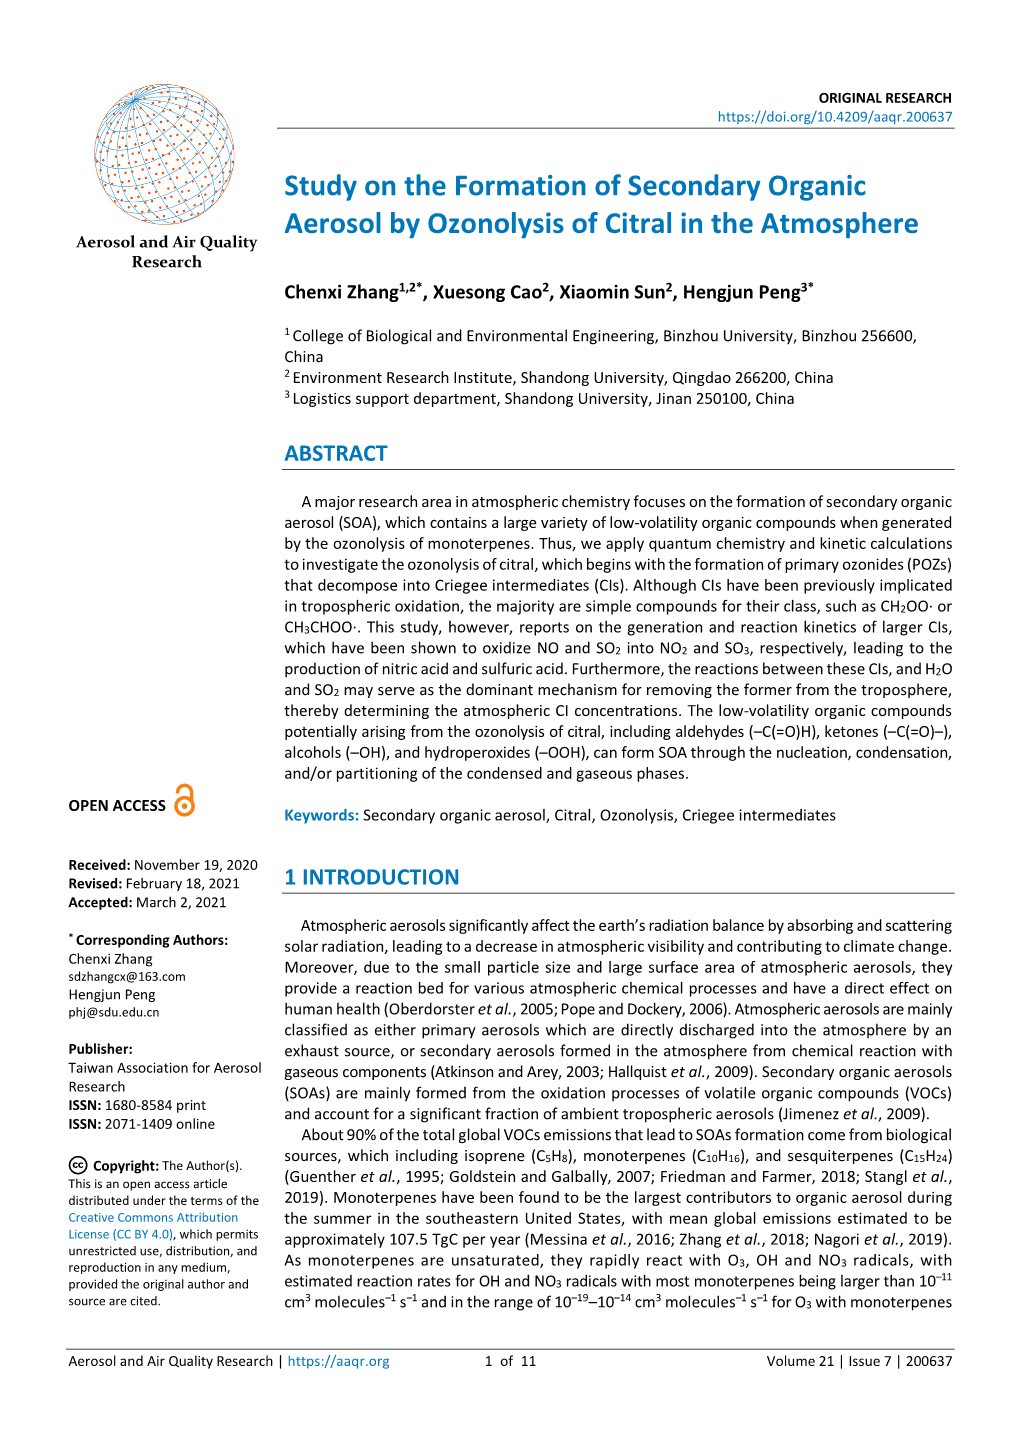 Study on the Formation of Secondary Organic Aerosol by Ozonolysis Of